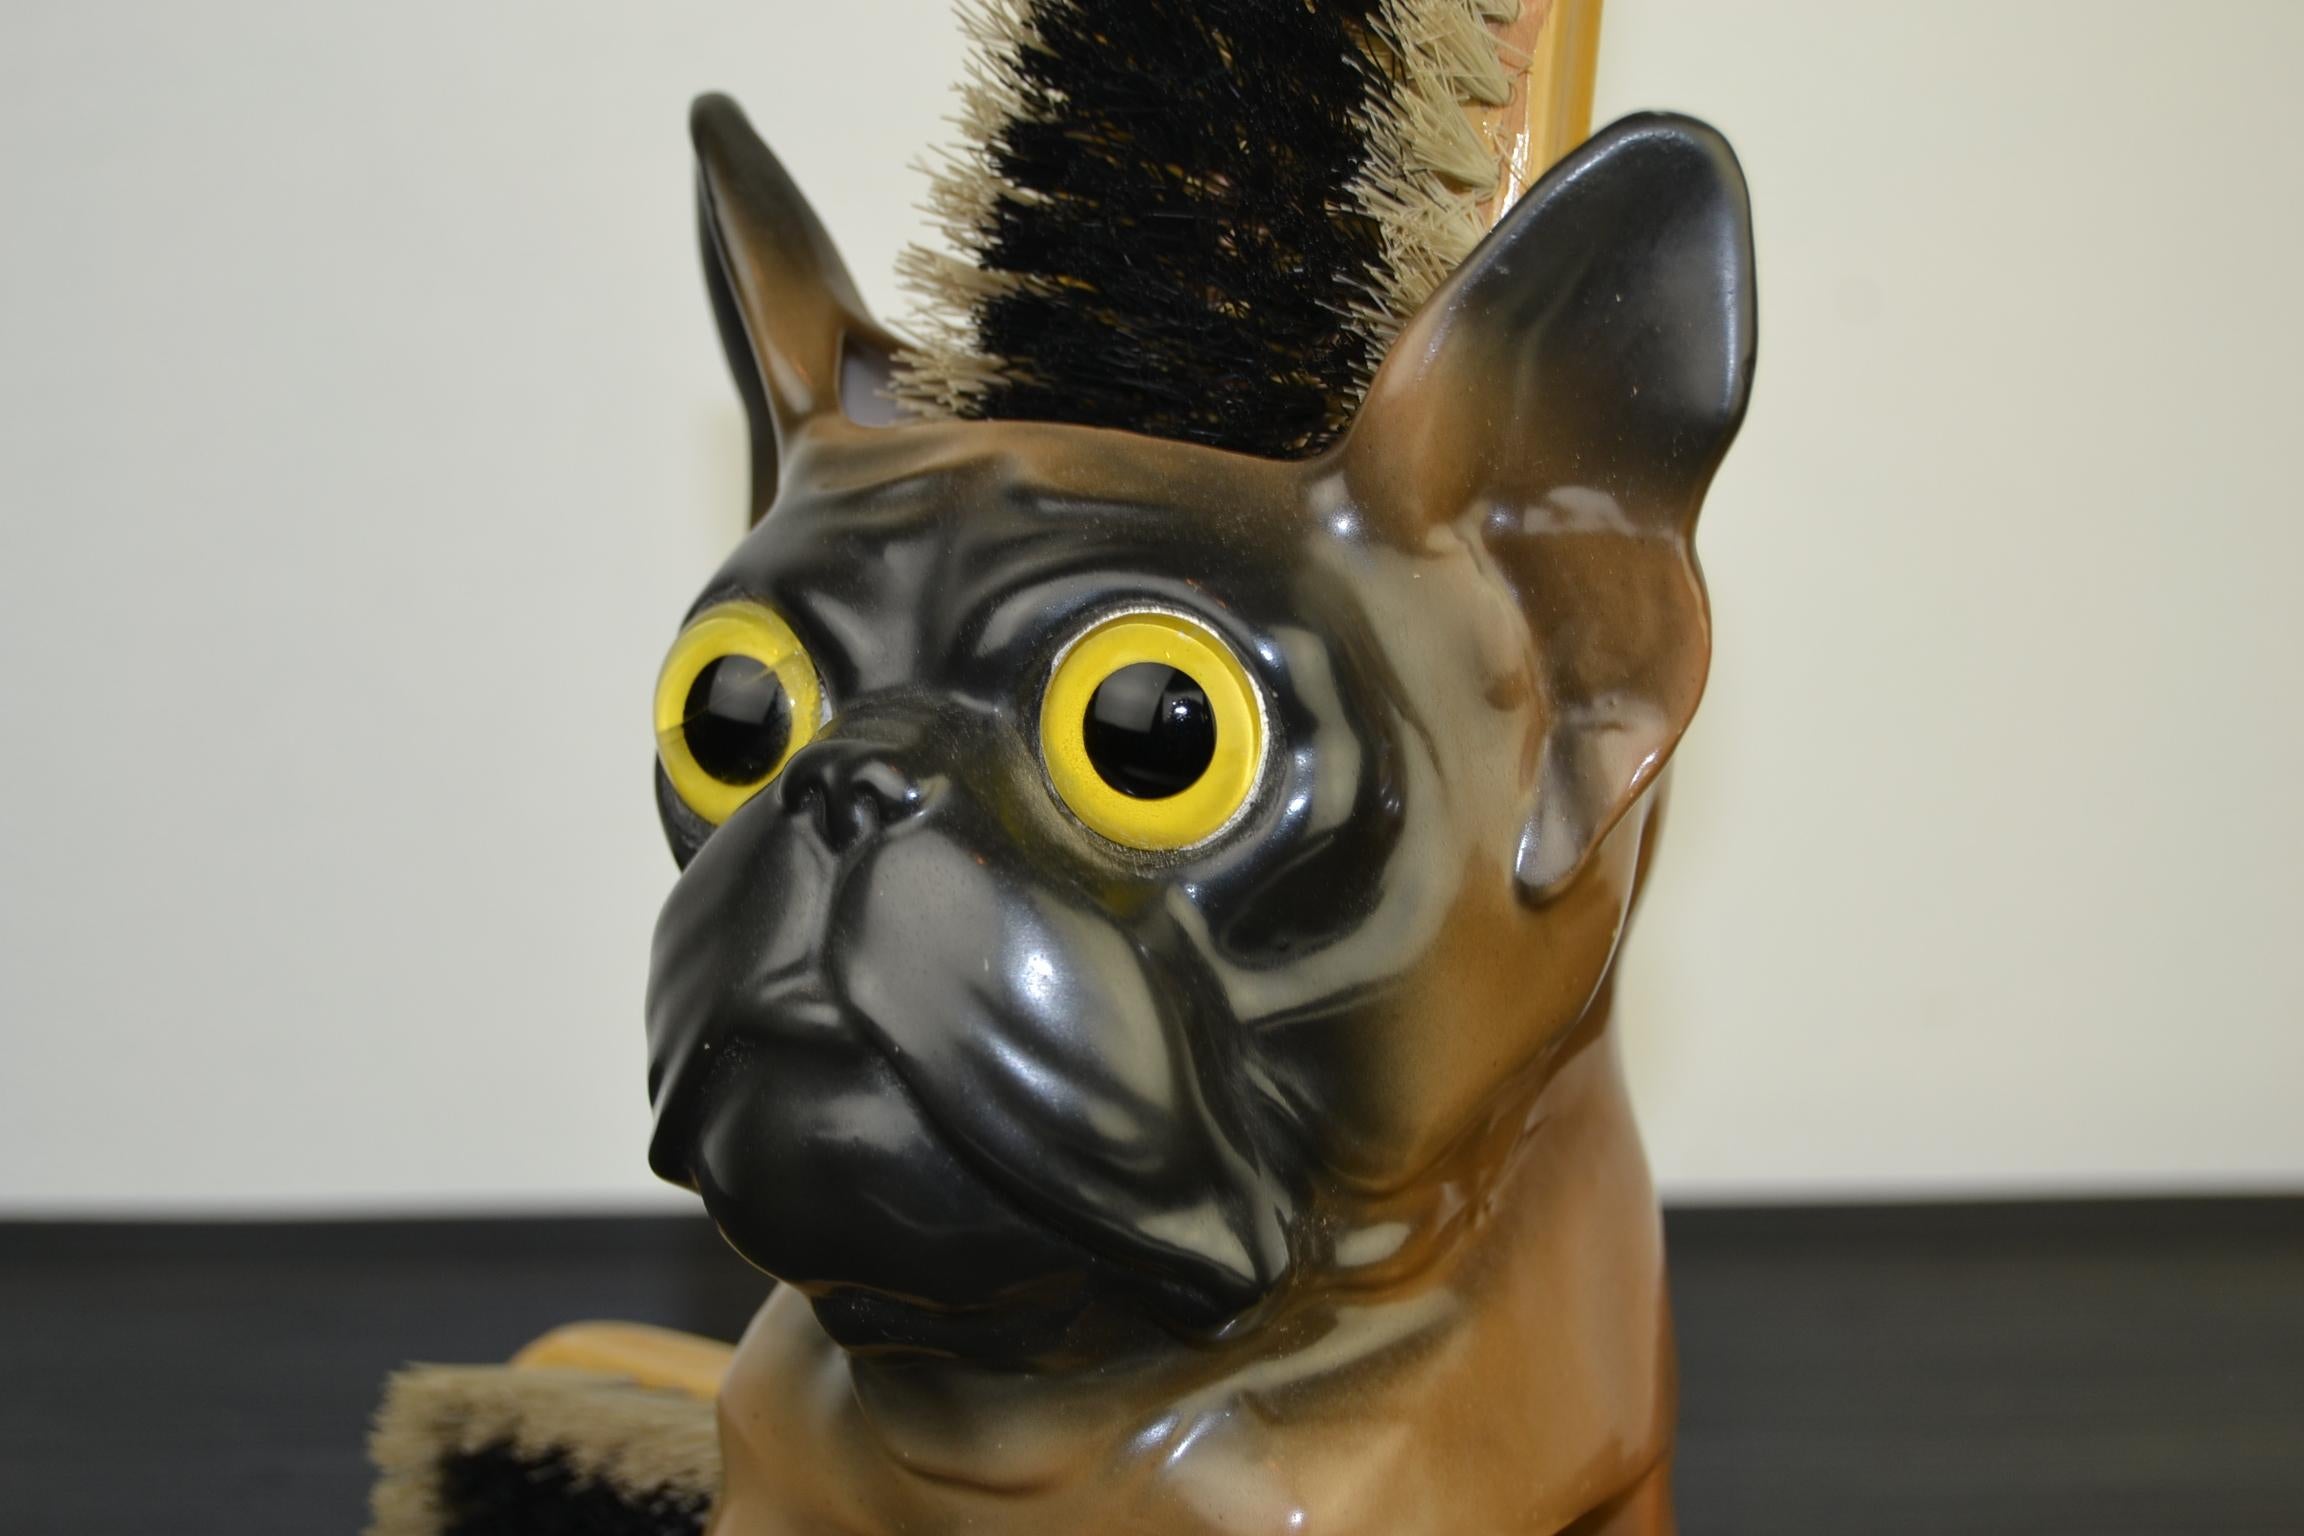 Porcelain French bulldog brush holder.
This European dog shaped brush holder is made of brown porcelain with a black snout, has two large glass eyes and space for two brushes. Dates 1930-1940.

The brushes have a floral motive. They have traces